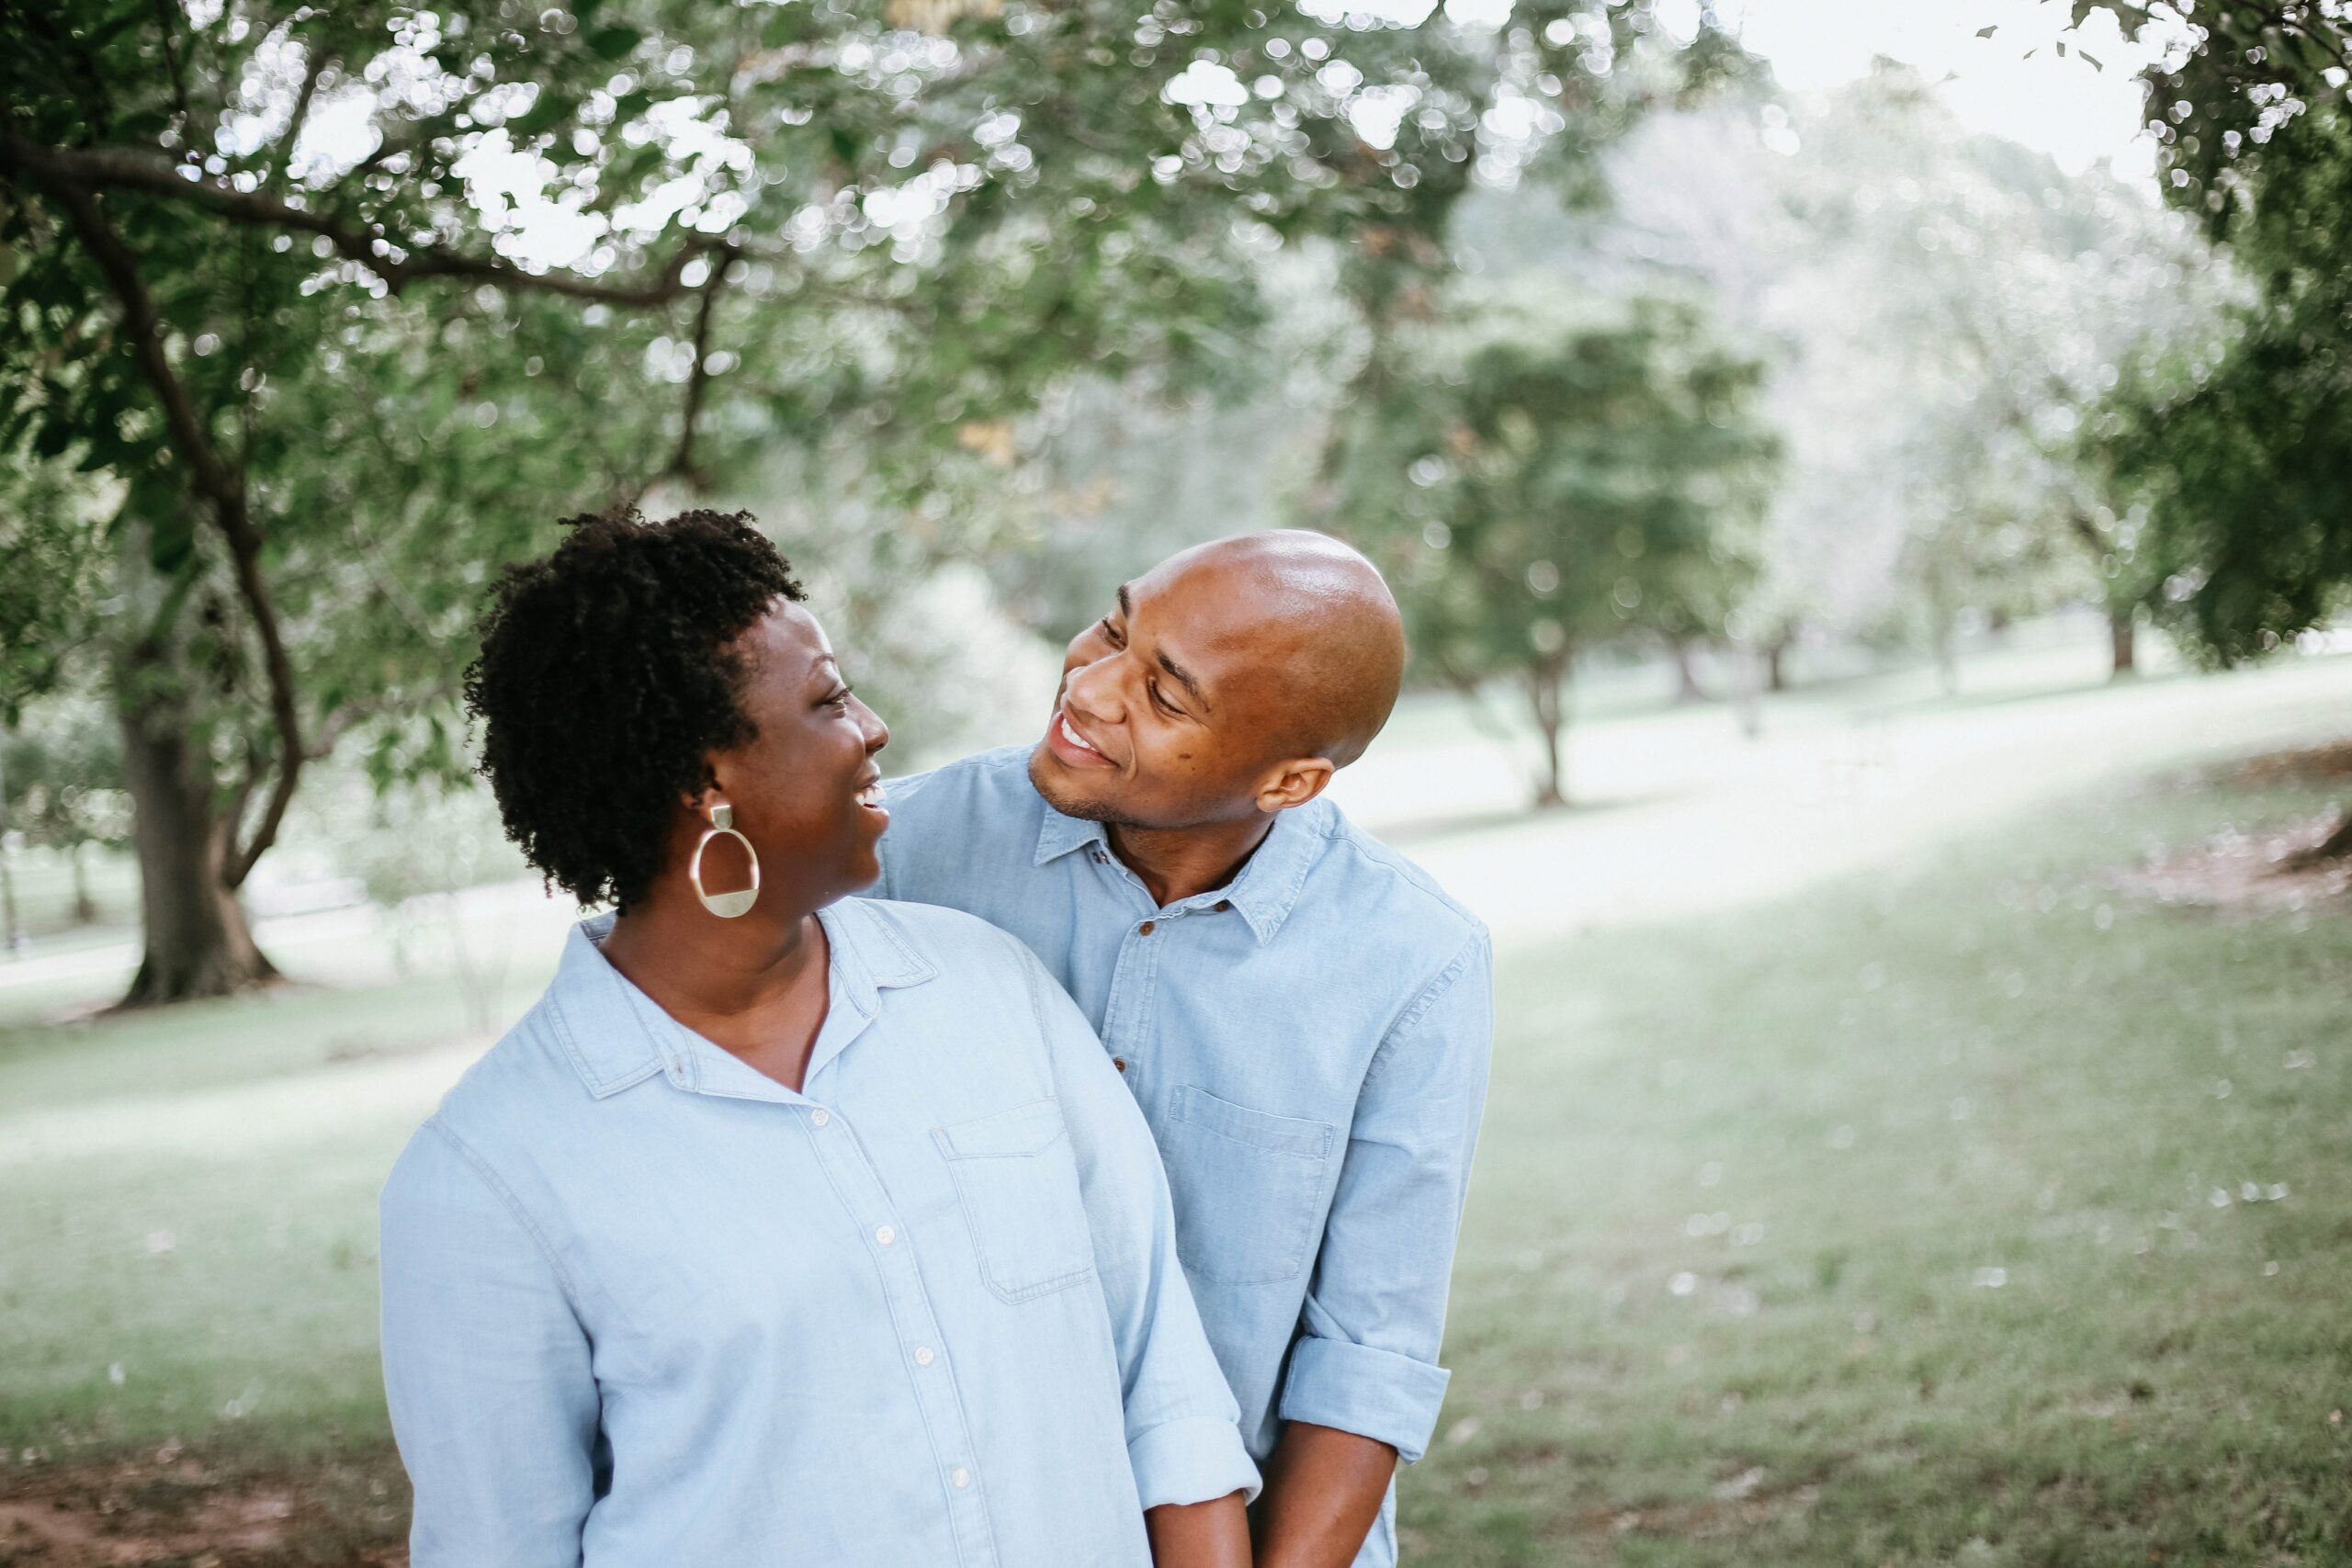 Where Should You Turn for Advice When Spouse Passes?